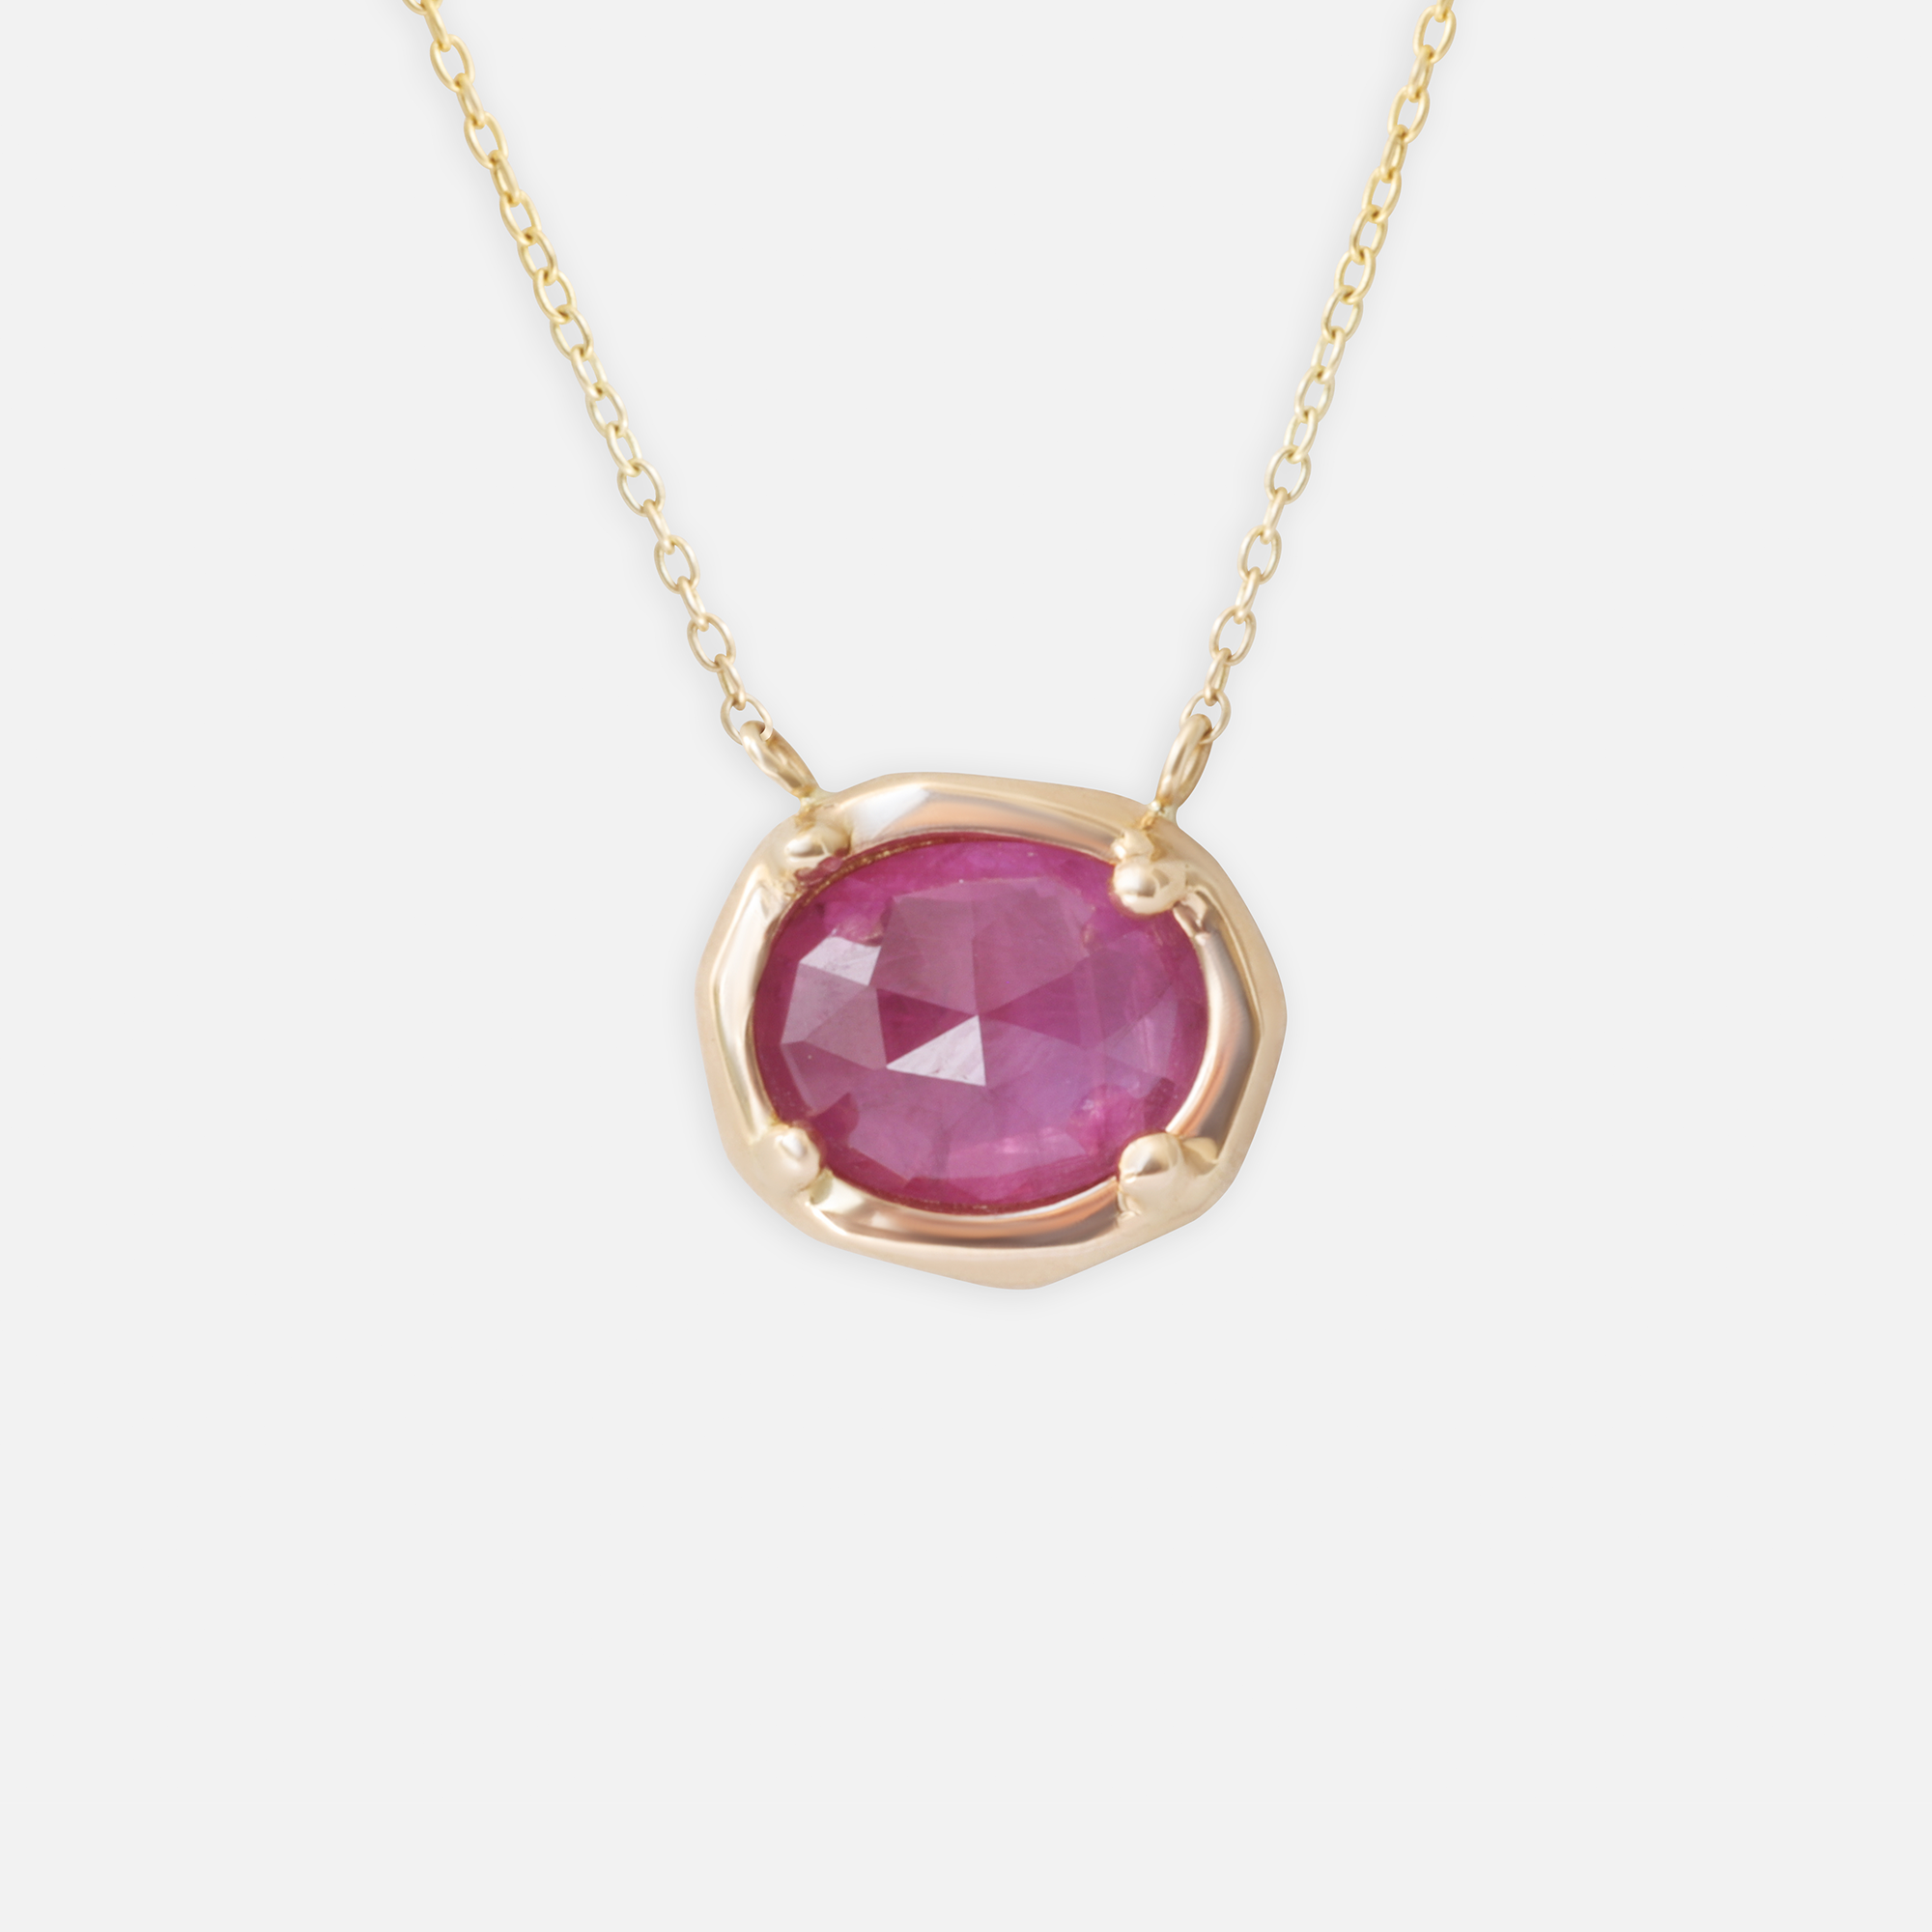 Pebble / Ruby Freeform Pendant By fitzgerald jewelry